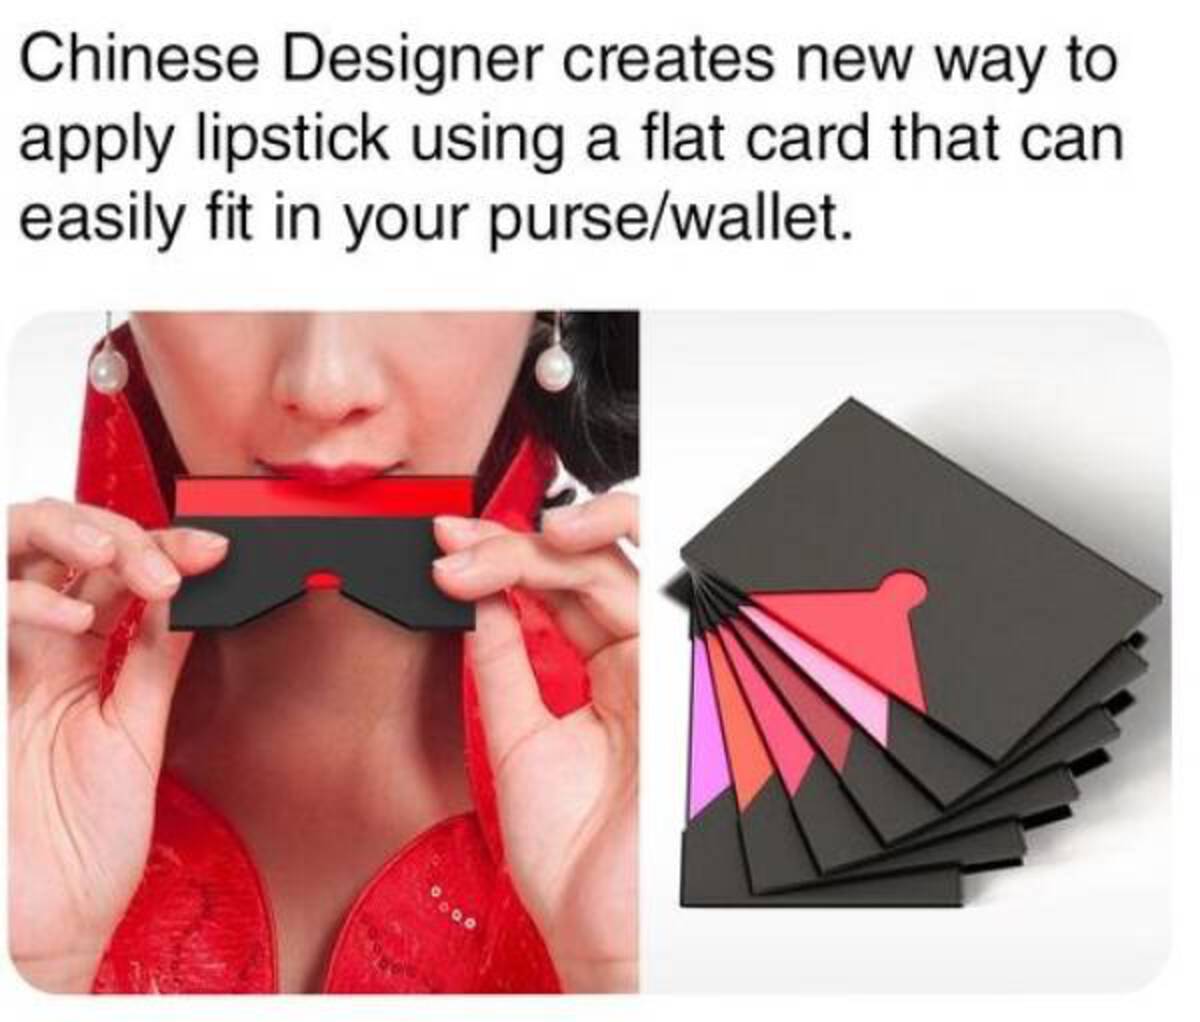 shoulder - Chinese Designer creates new way to apply lipstick using a flat card that can easily fit in your pursewallet. 000